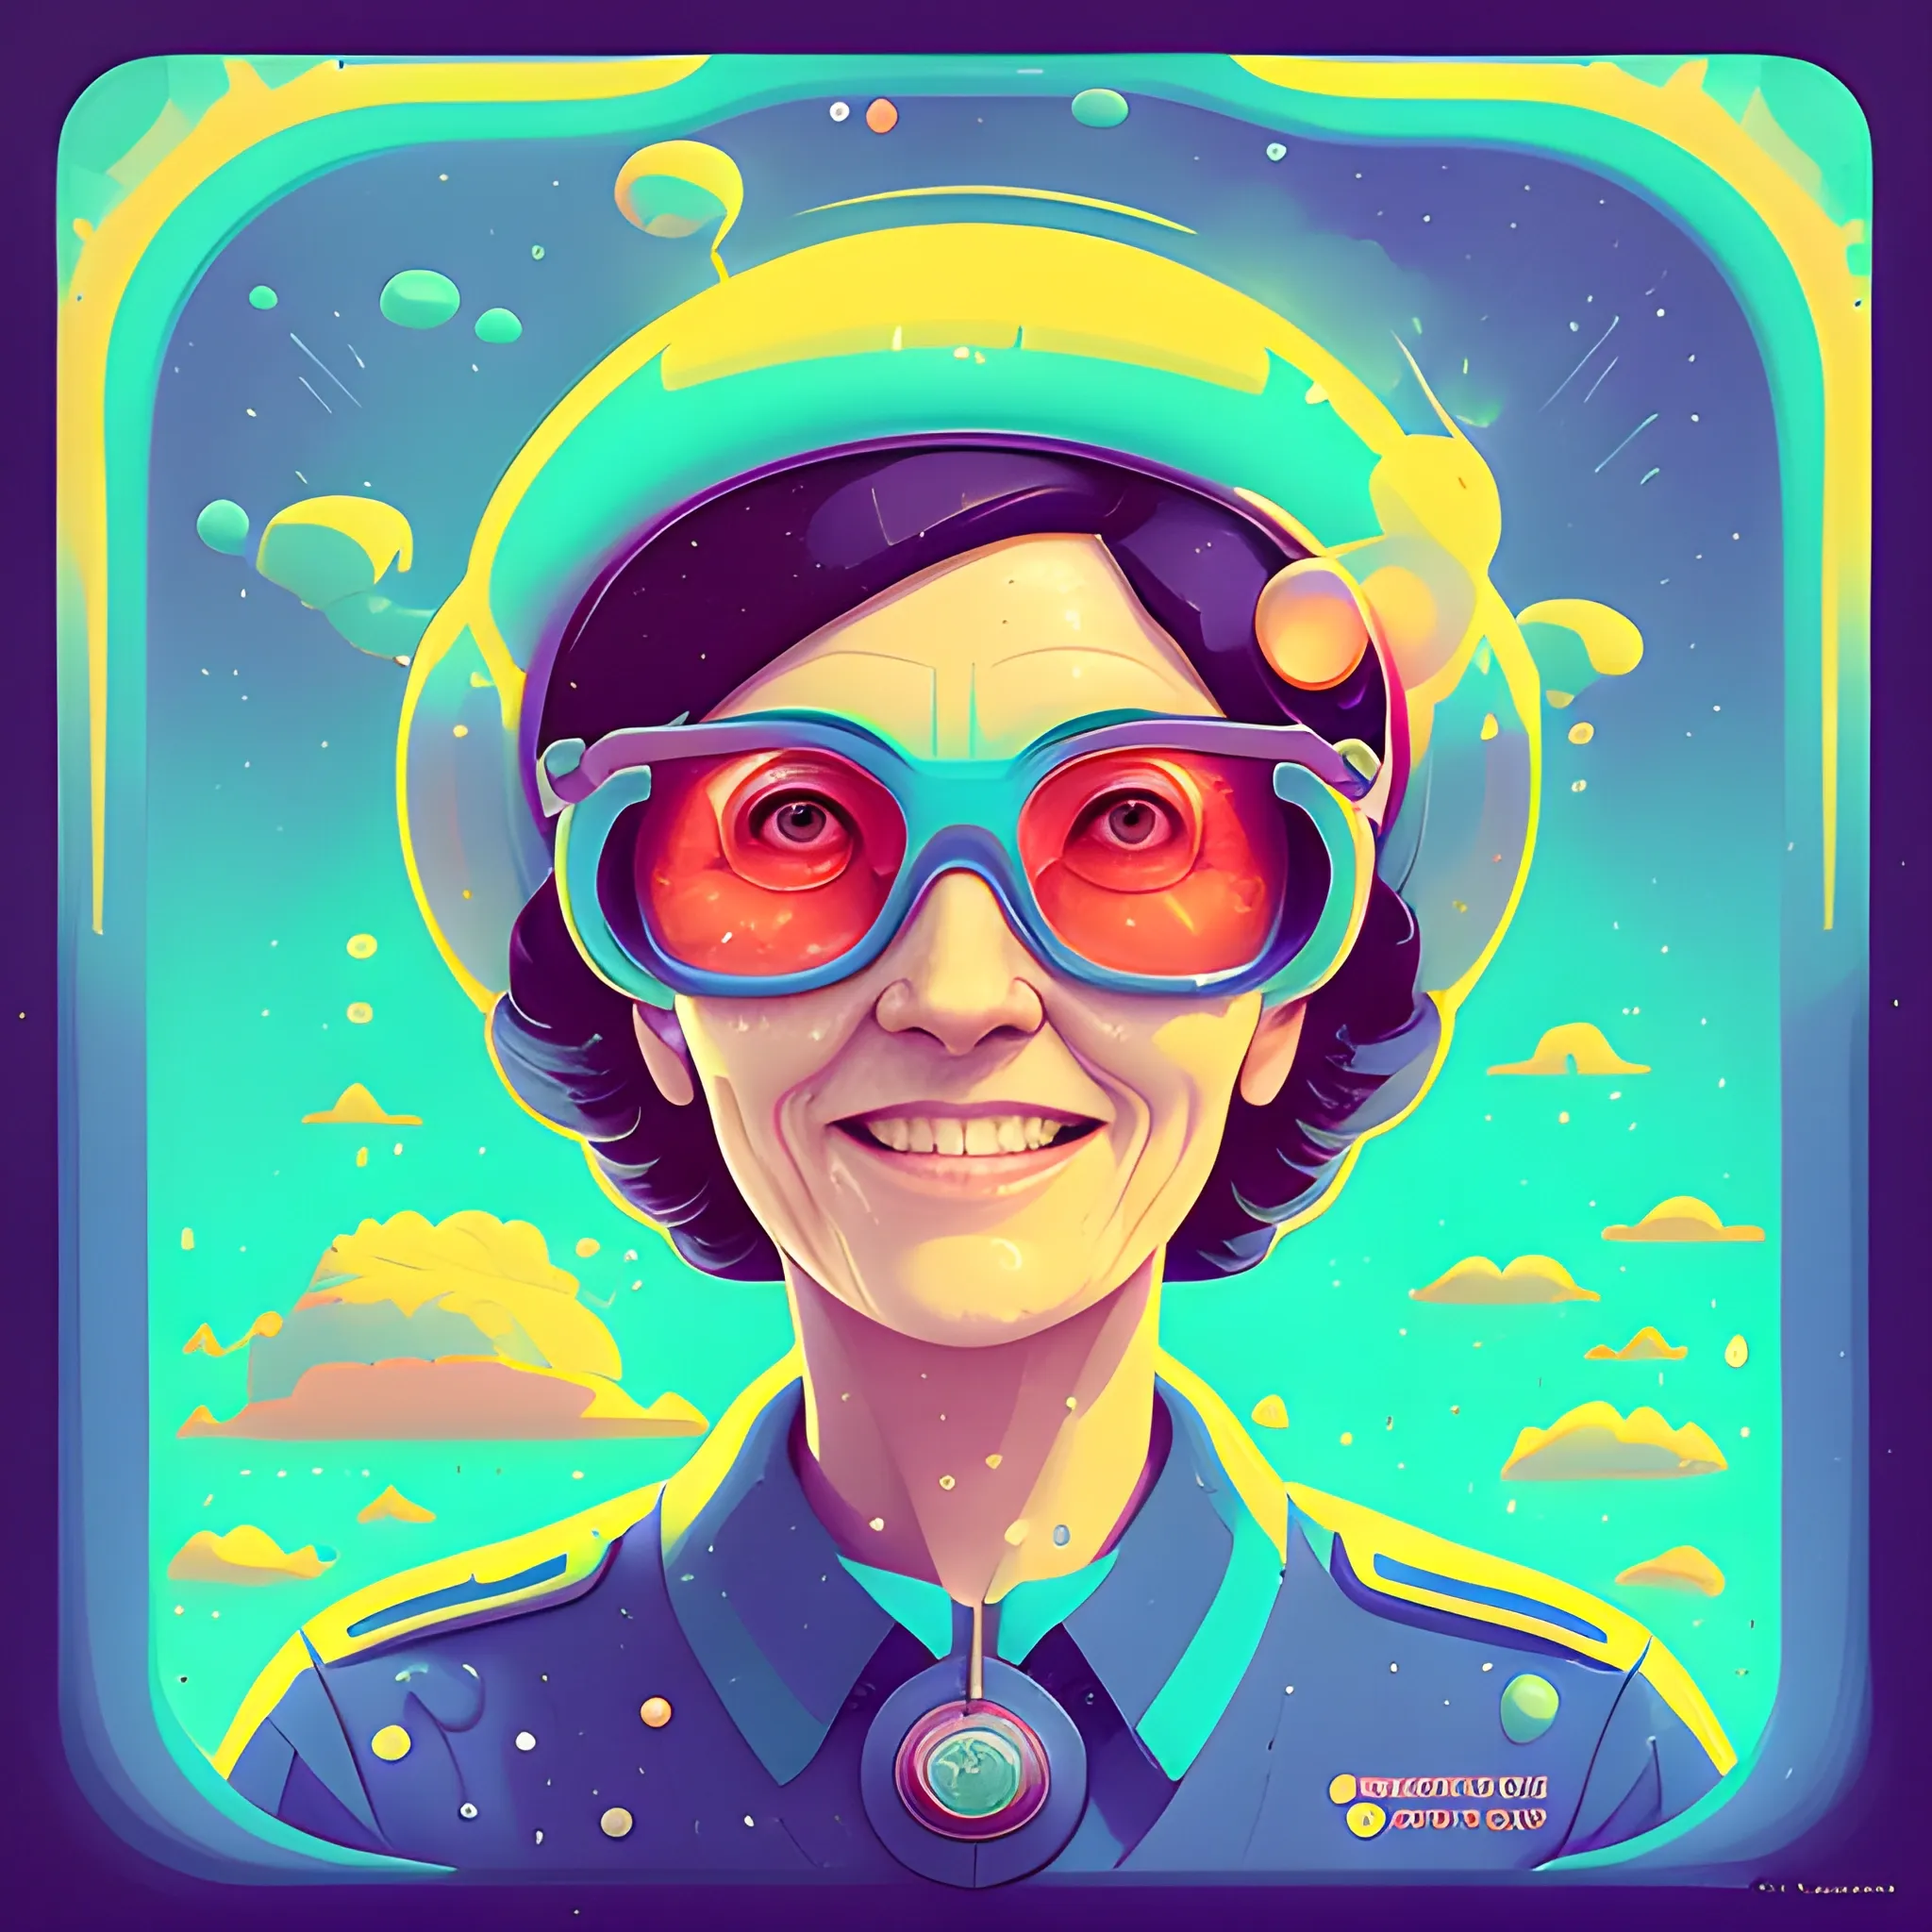 Friendly wise mature female government worker. Should be warm, cheerful, knowledgeable, and smiling. by petros afshar, ross tran, Tom Bagshaw, tom whalen, underwater bubbly psychedelic clouds, Anaglyph 3D lens blur effect
